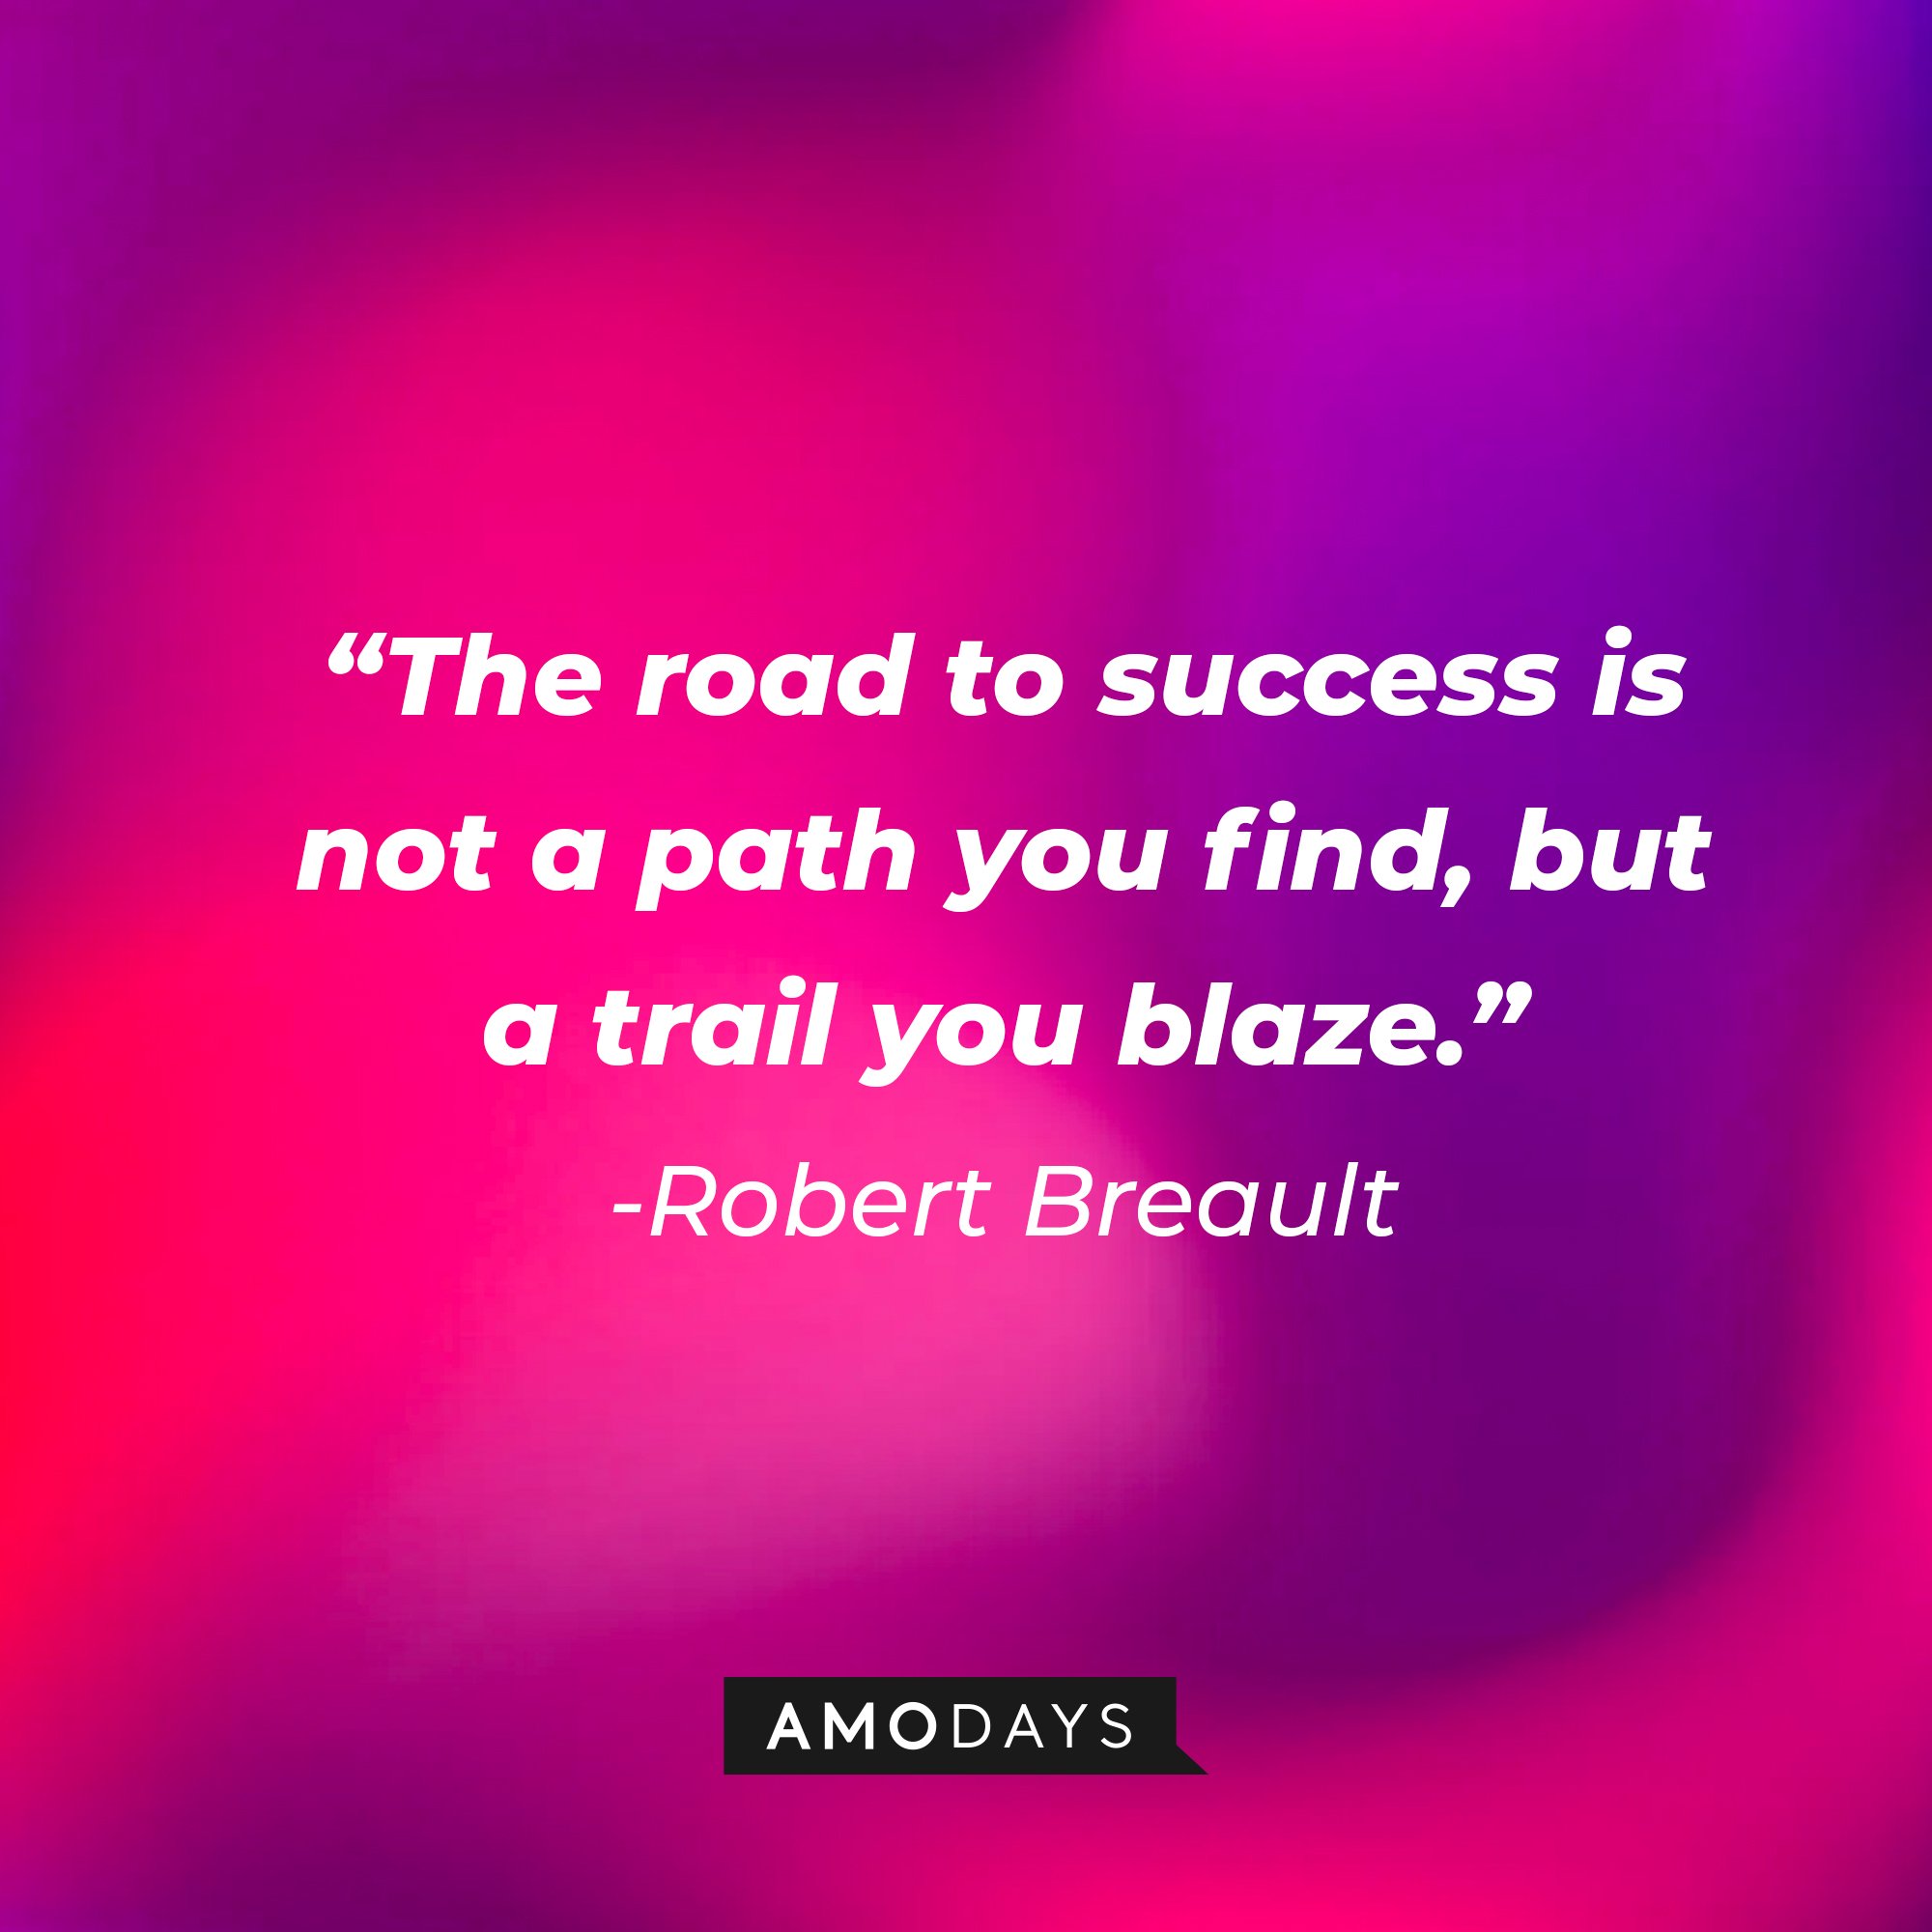 Robert Breault’s quote: "The road to success is not a path you find, but a trail you blaze." | Image: AmoDays